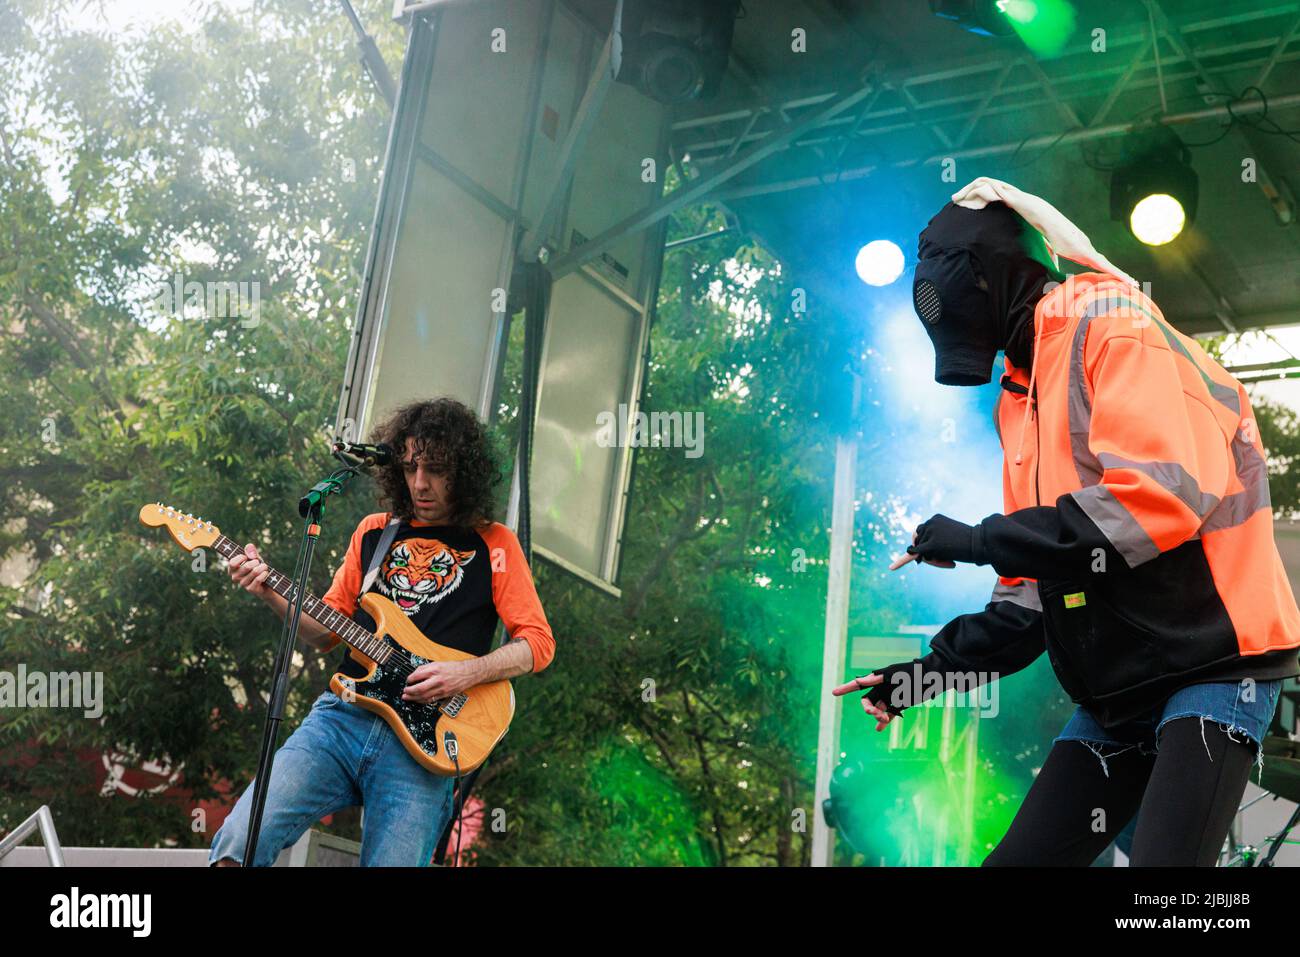 Bloomington, United States. 04th June, 2022. Will Toledo (R) of Car Seat Headrest, right, wears a mask, Ethan Ives plays guitar, while performing during the Granfalloon festival. Granfalloon is an annual festival of arts, music, and scholarship inspired by Hoosier author Kurt Vonnegut, according to the events webpage. The festival takes place in Bloomington, Indiana. Credit: SOPA Images Limited/Alamy Live News Stock Photo